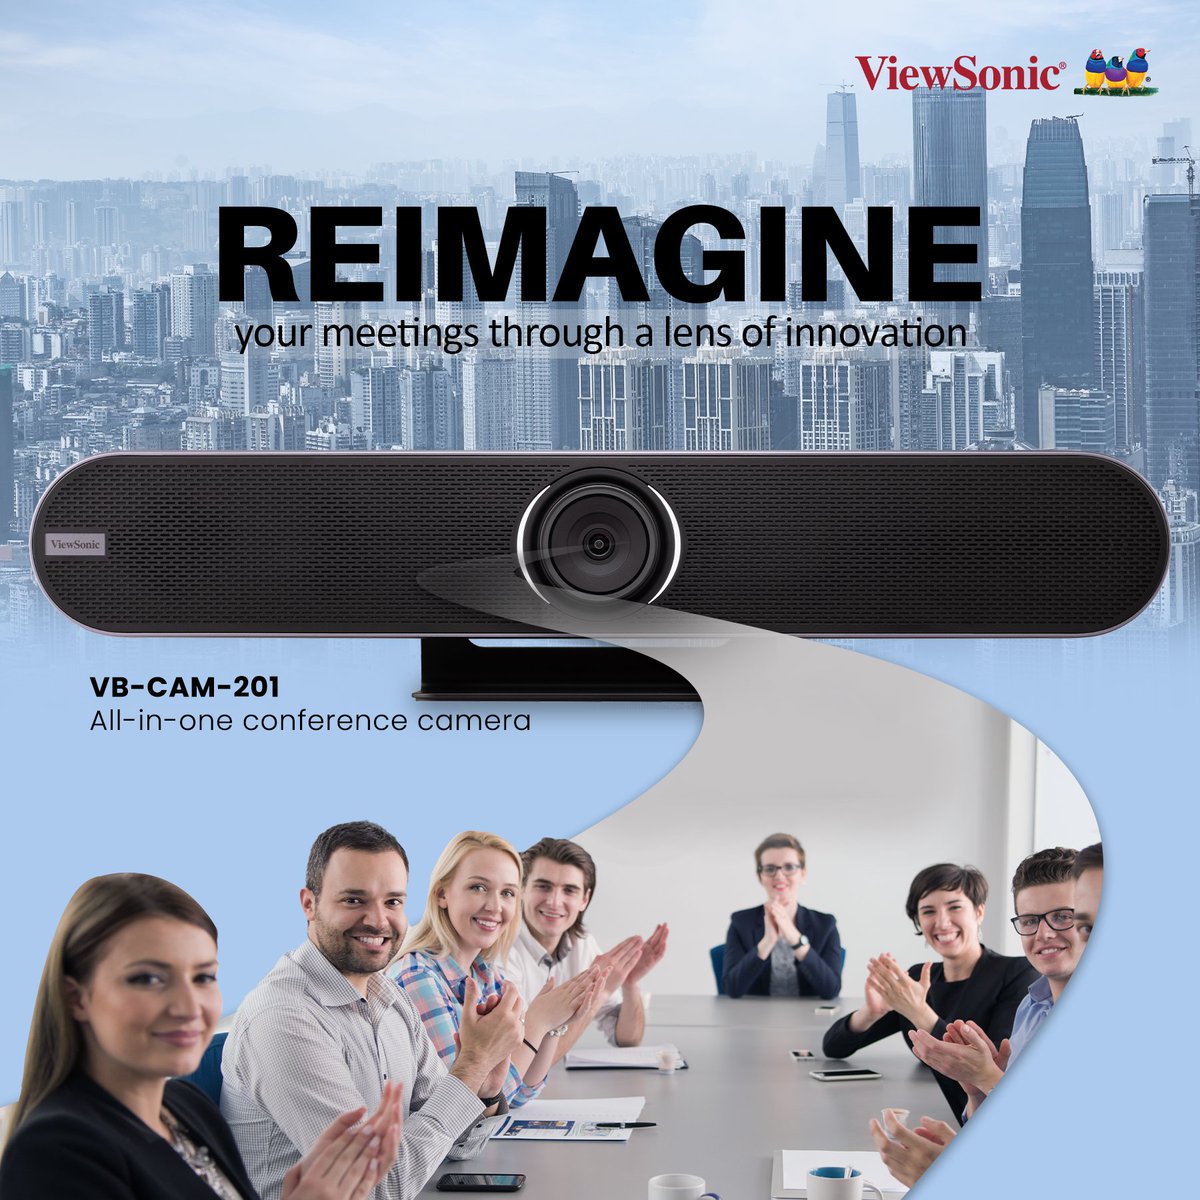 Revolutionize meetings, one frame at a time, with VB-CAM-201!
Get stunning 4K UHD visuals, clear voice tracking, and easy framing adjustments, all in one frame. 

#ViewSonic #ViewSonicIndia #avtechlife #projectone #projectors #avtech #display #conference #camera #conferenceroom